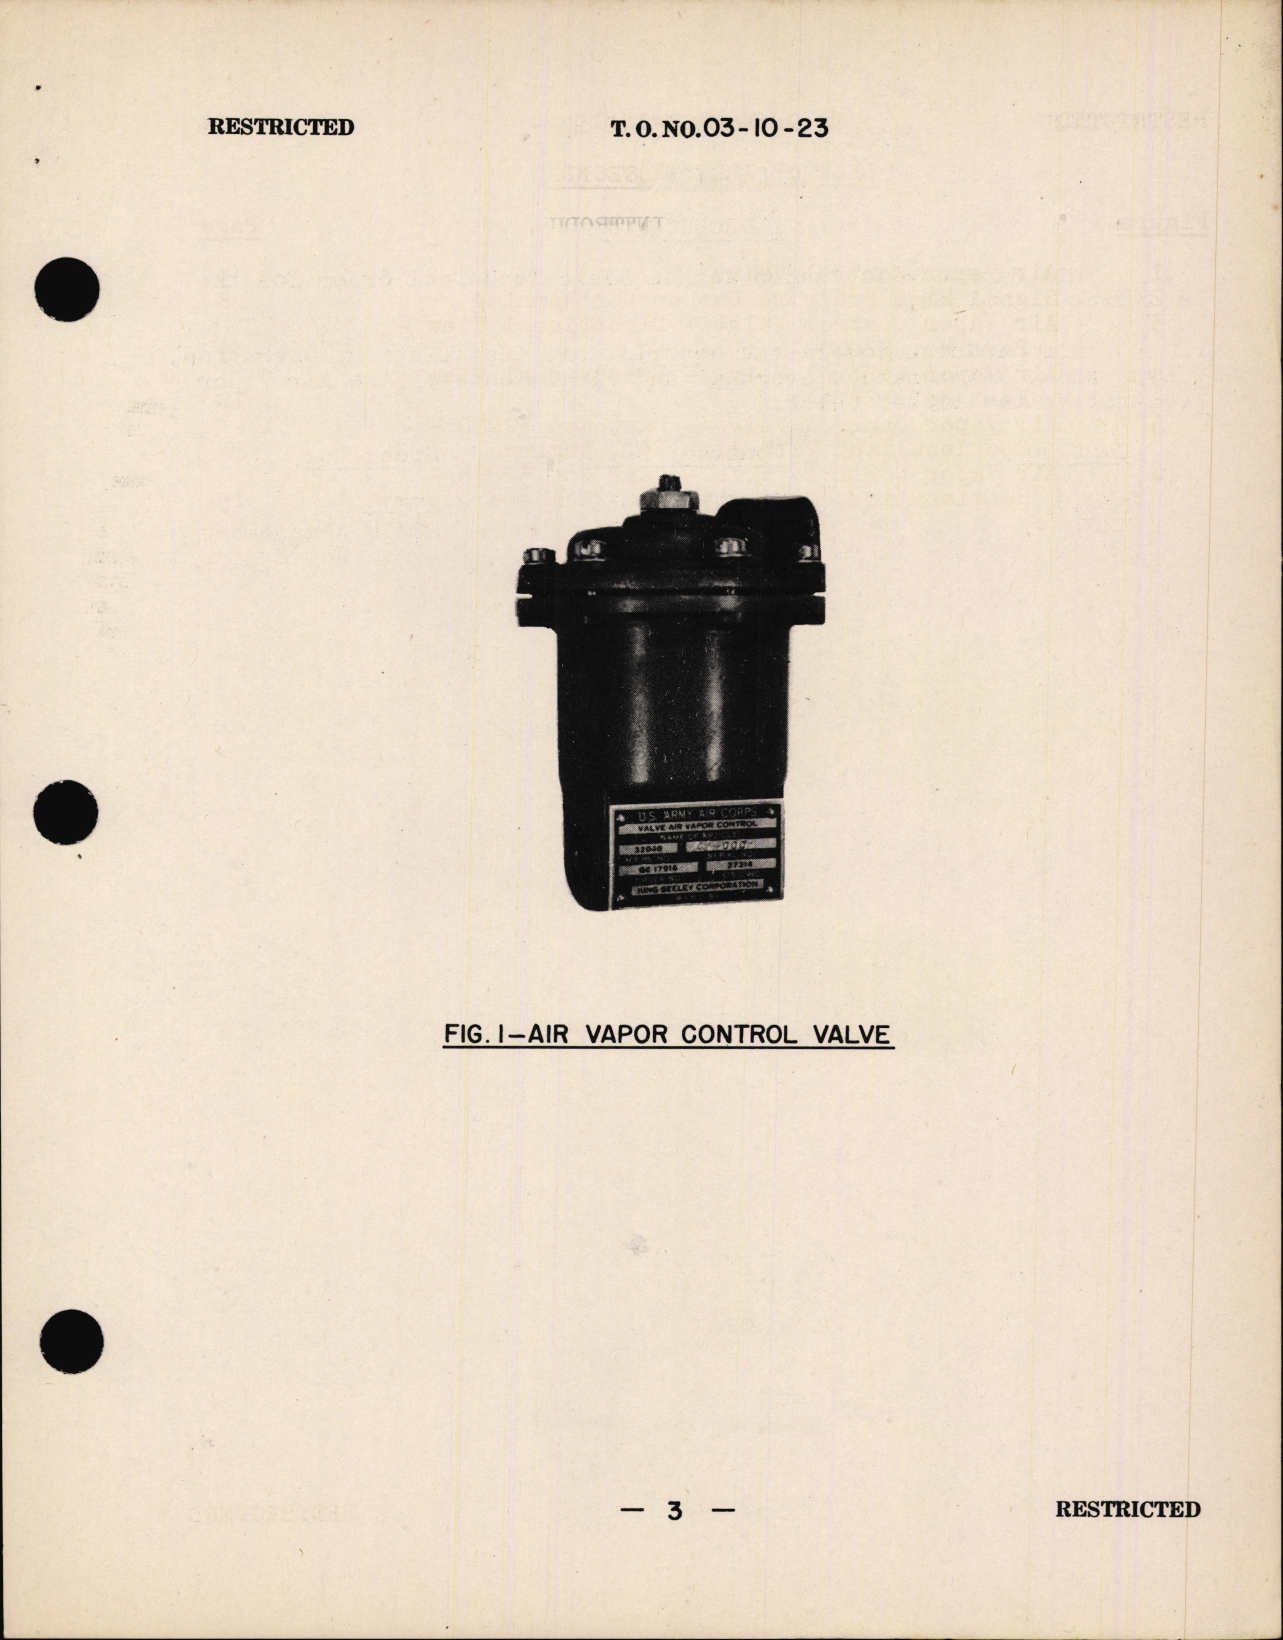 Sample page 5 from AirCorps Library document: Handbook of Instructions with Parts Catalog for Air Vapor Control Valves